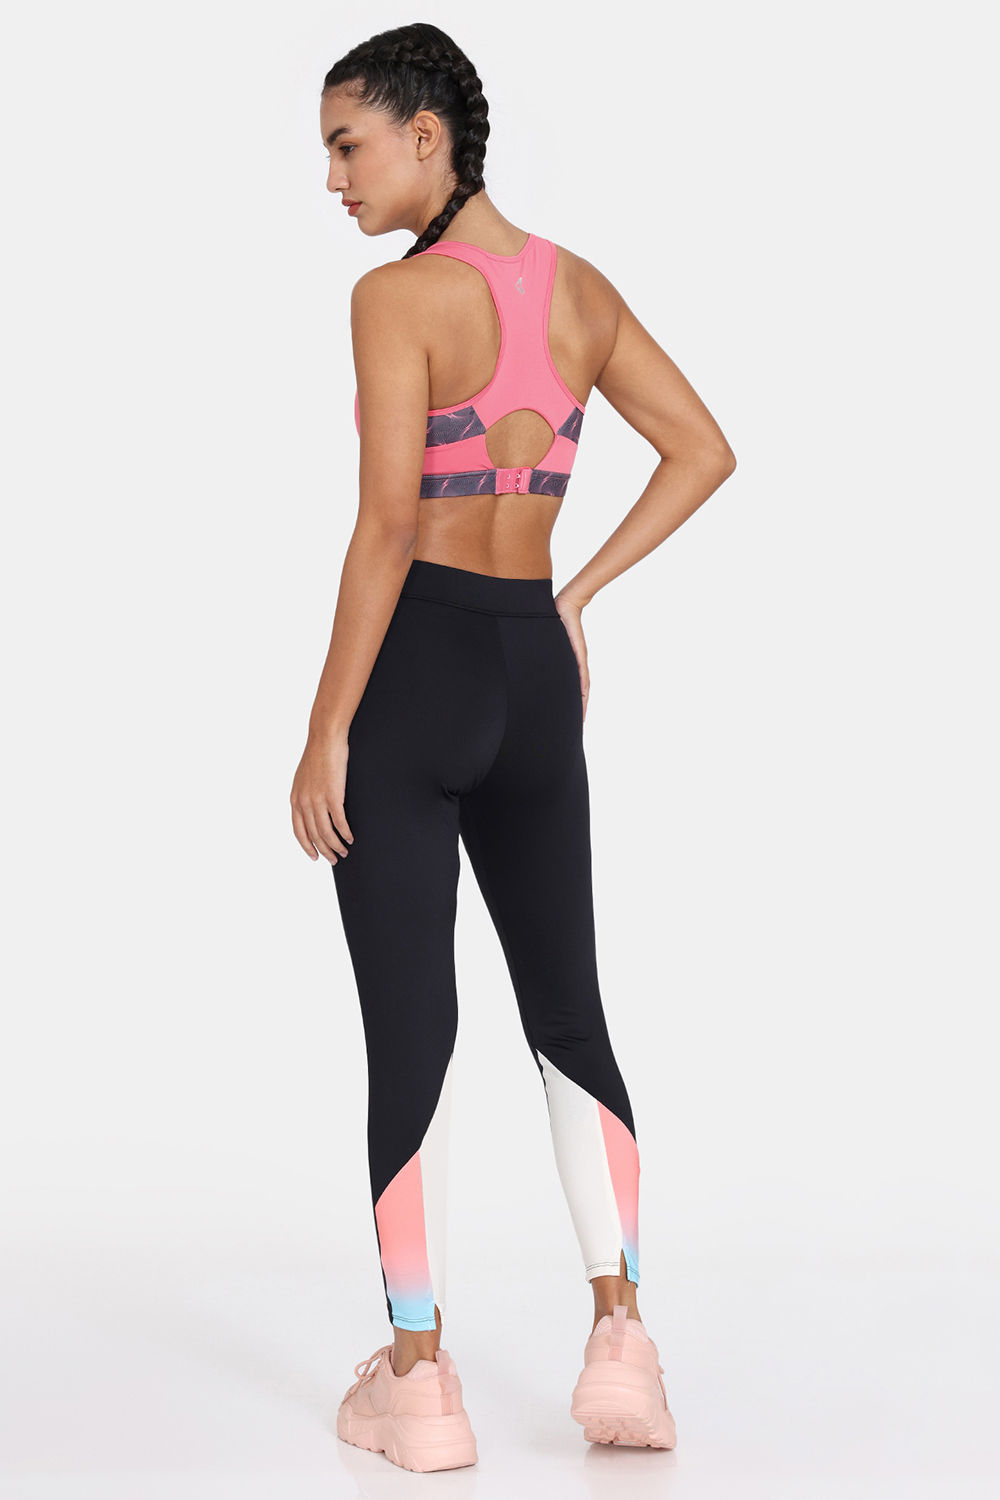 Buy Zelocity Quick Dry Removable Padding Sports Bra With High Rise